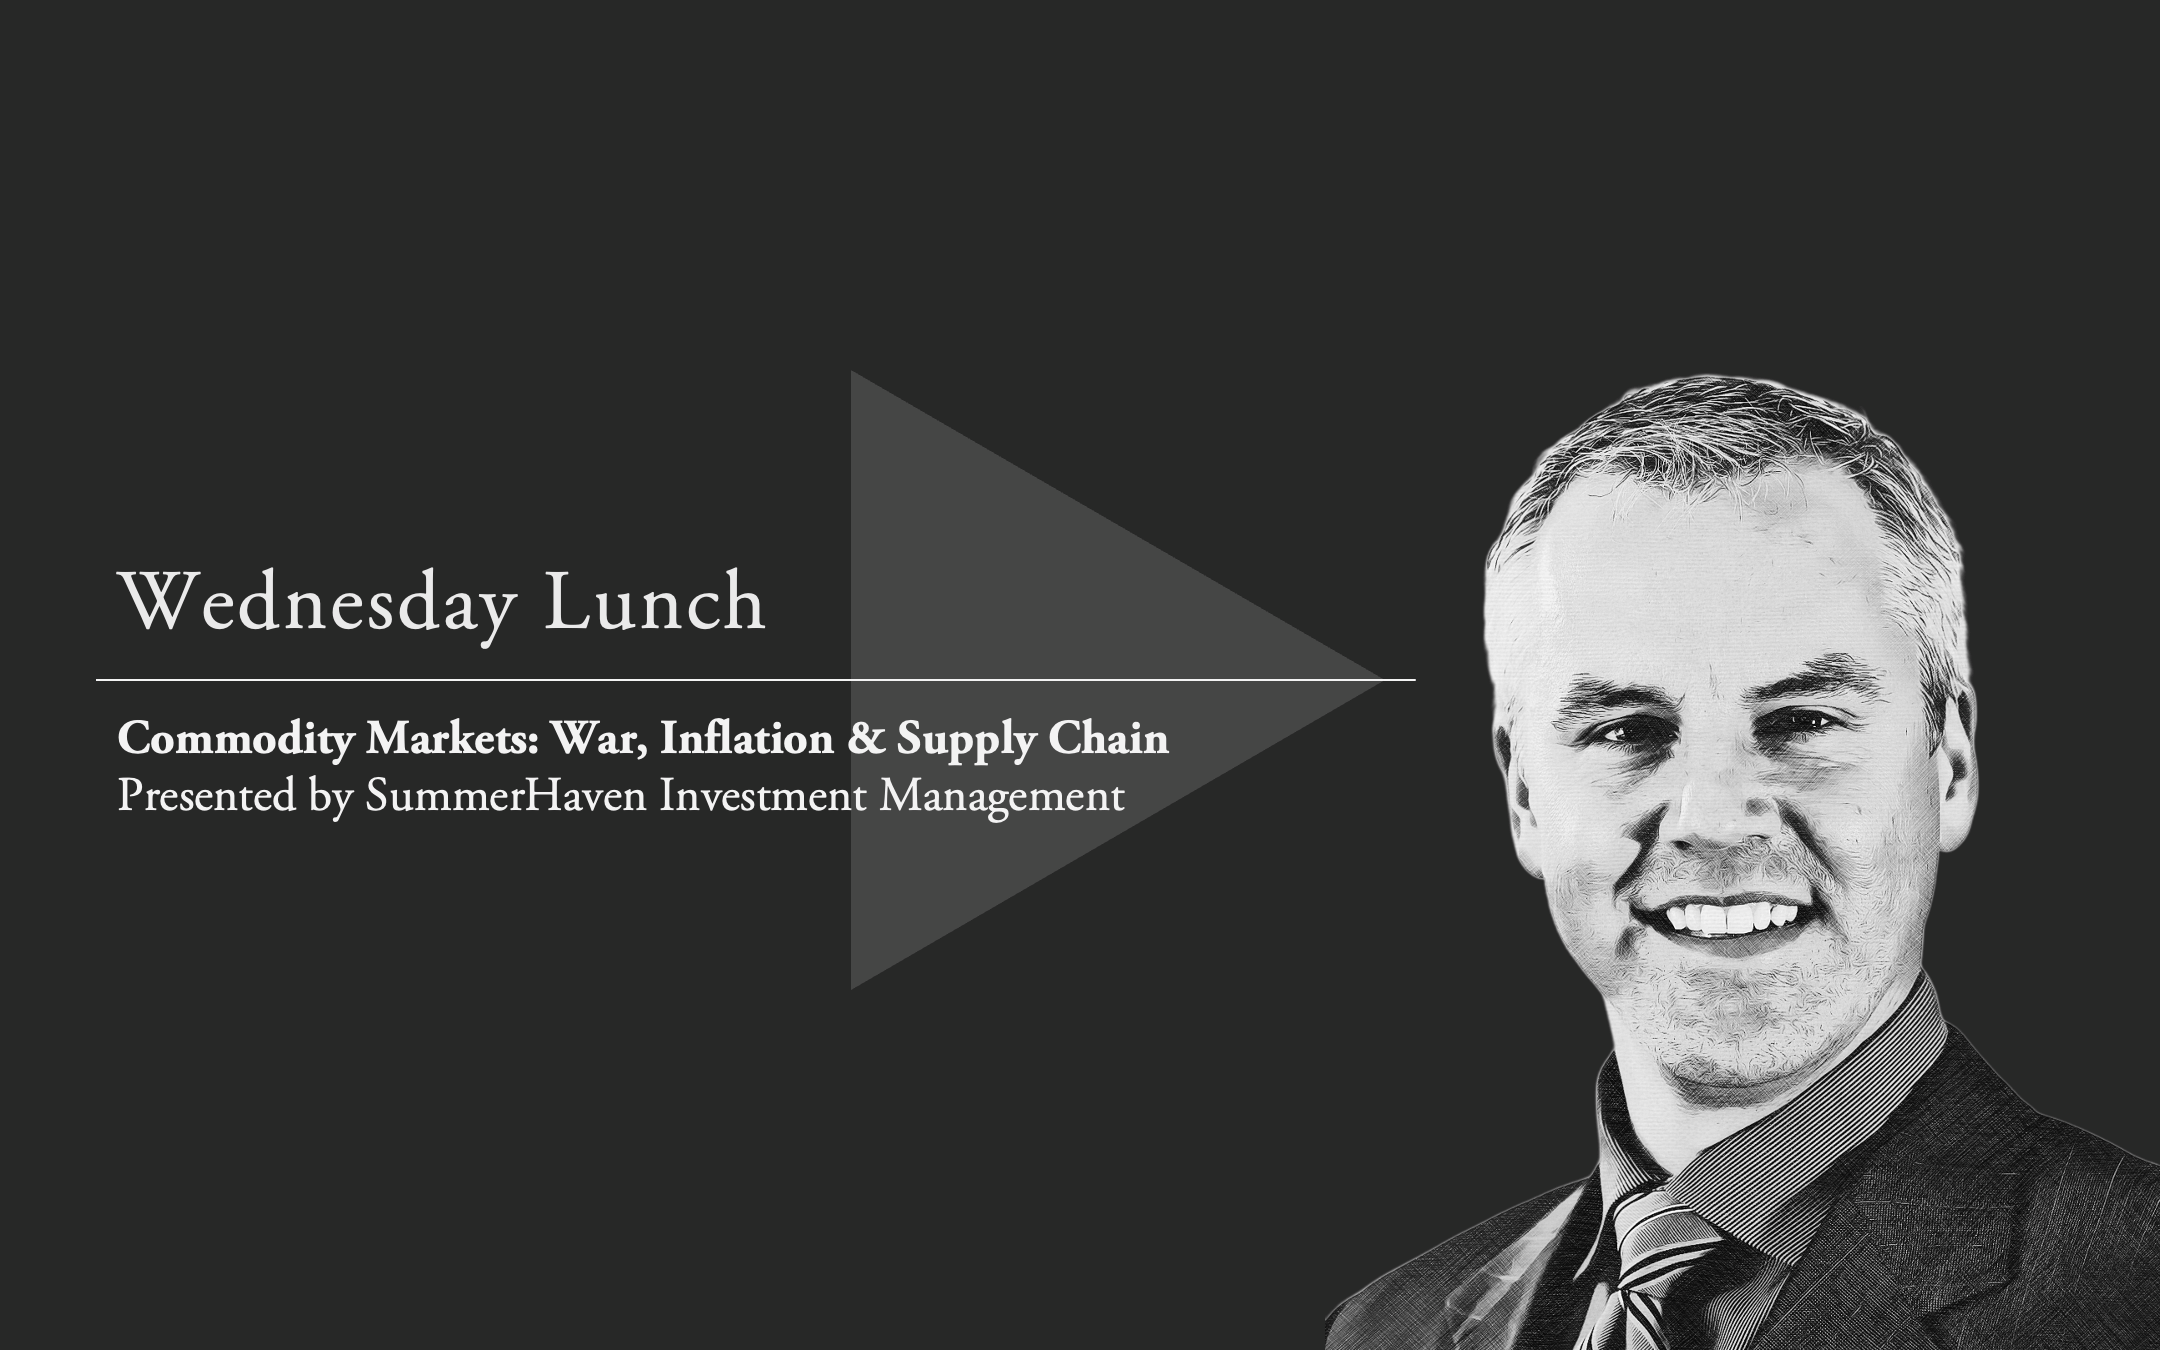 We are happy to introduce a new regular feature for our publication: Wednesday Lunch.